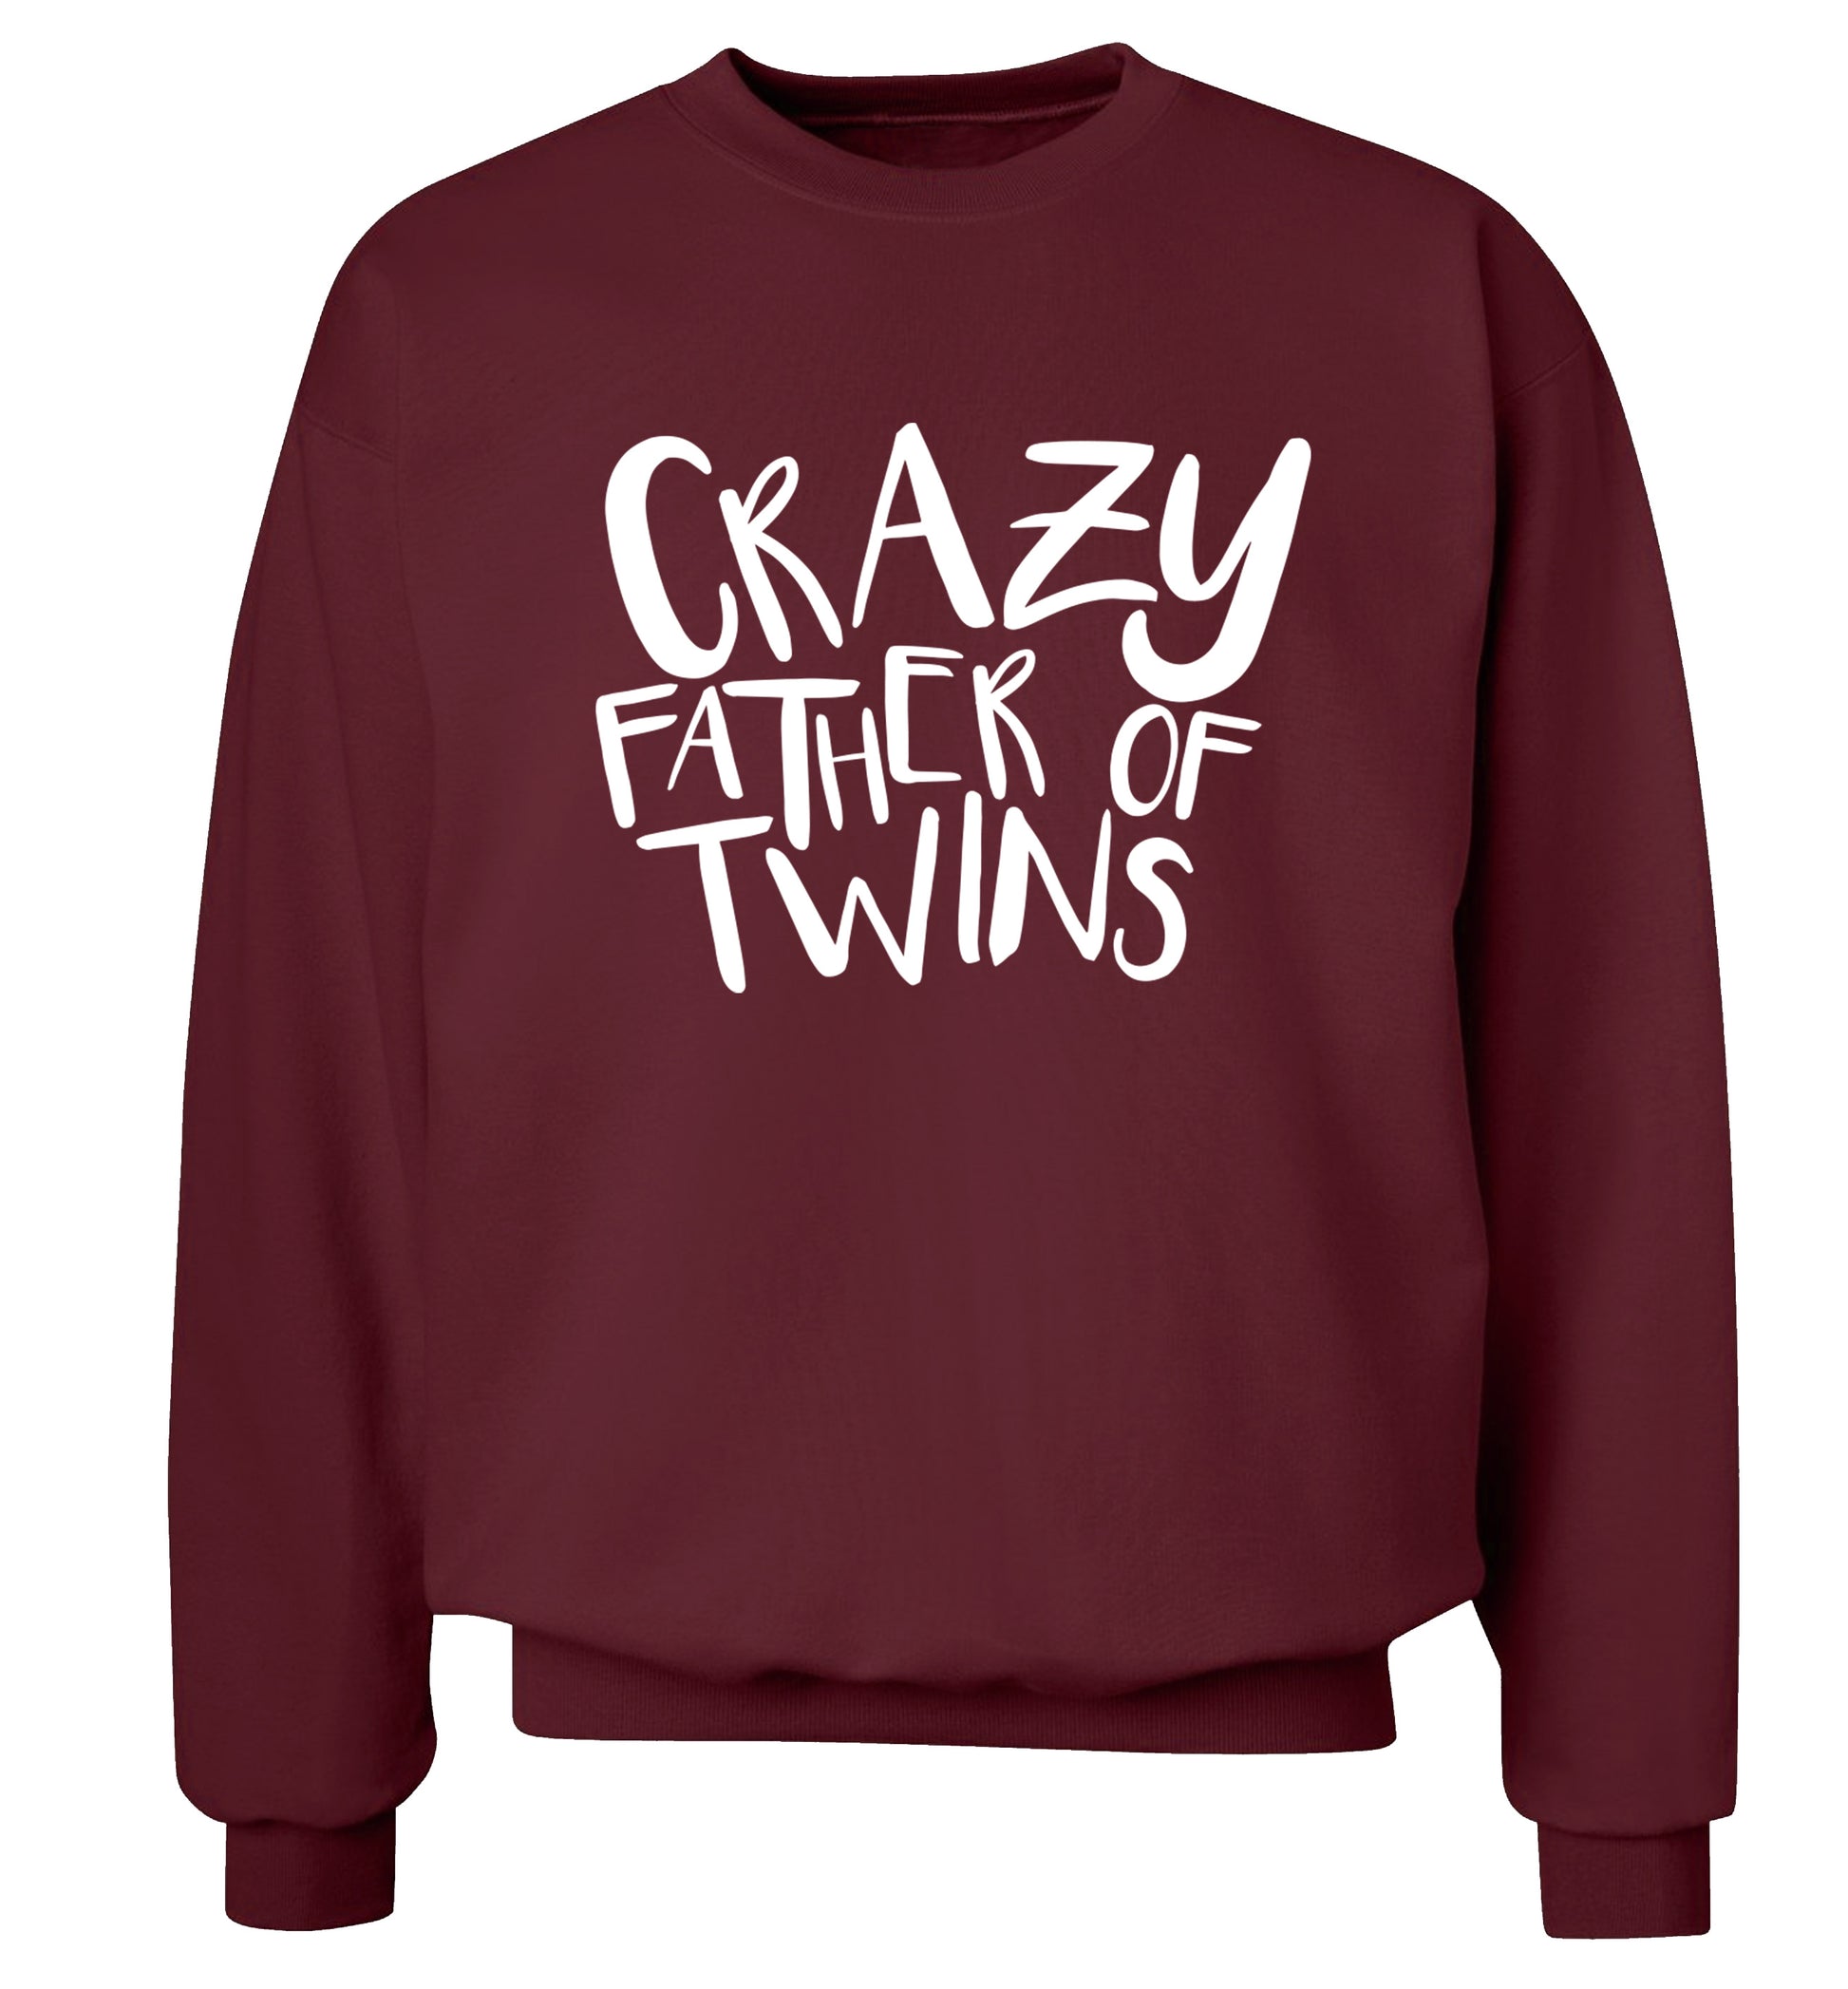 Crazy father of twins Adult's unisex maroon Sweater 2XL